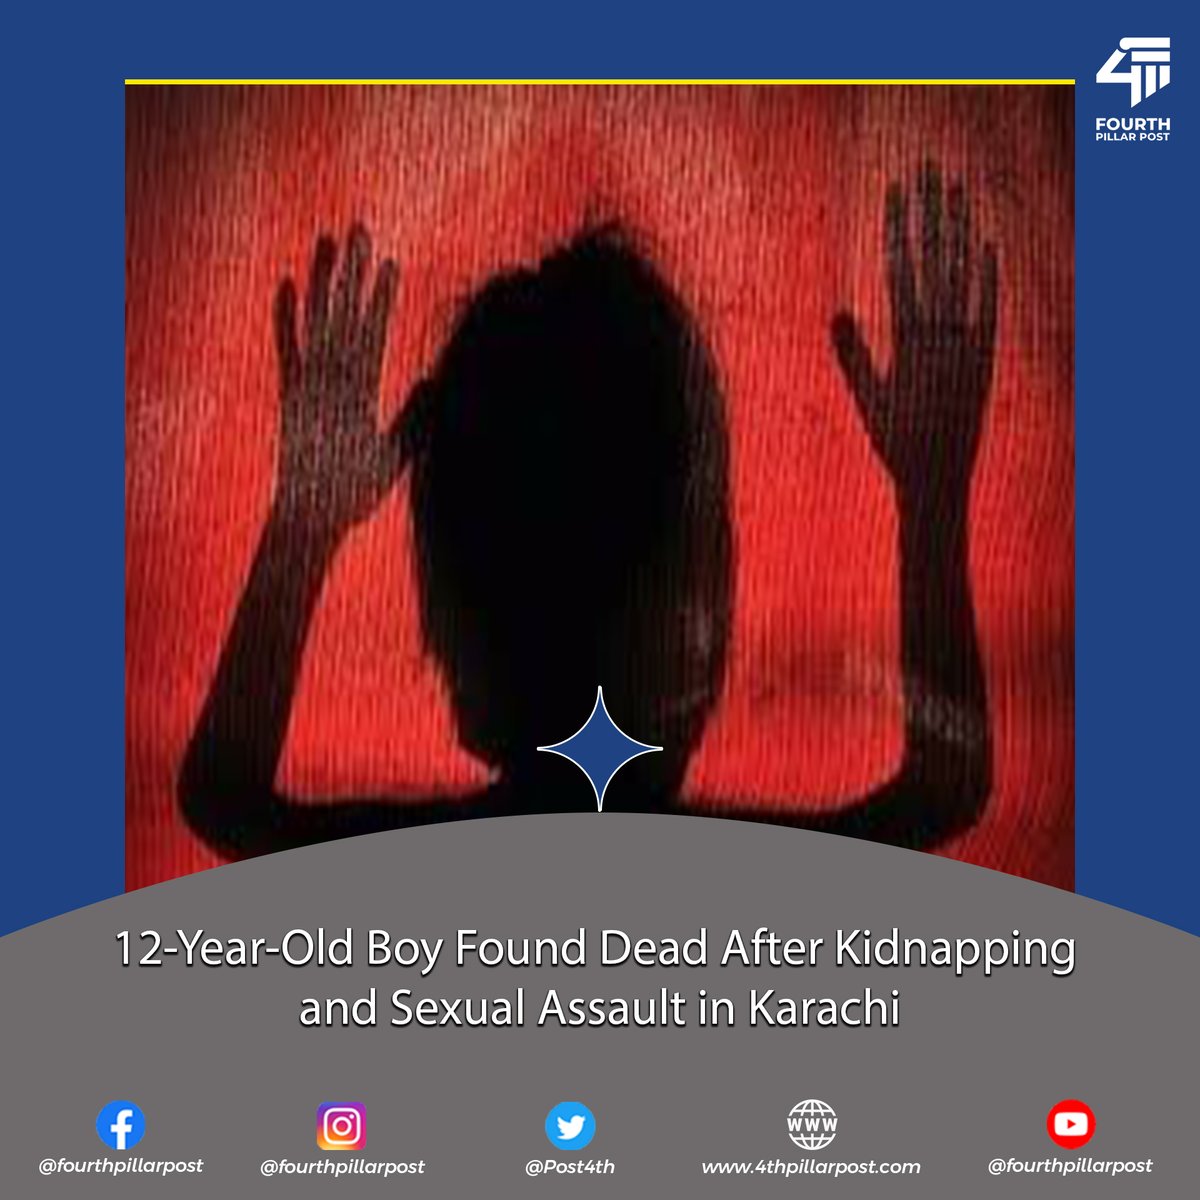 Tragic news from Karachi as a 12-year-old boy, kidnapped earlier this month, was found dead after a sexual assault. Arrests have been made, shedding light on this horrifying incident. #Karachi #ChildSafety #JusticeForVictim
Read more: 4thpillarpost.com